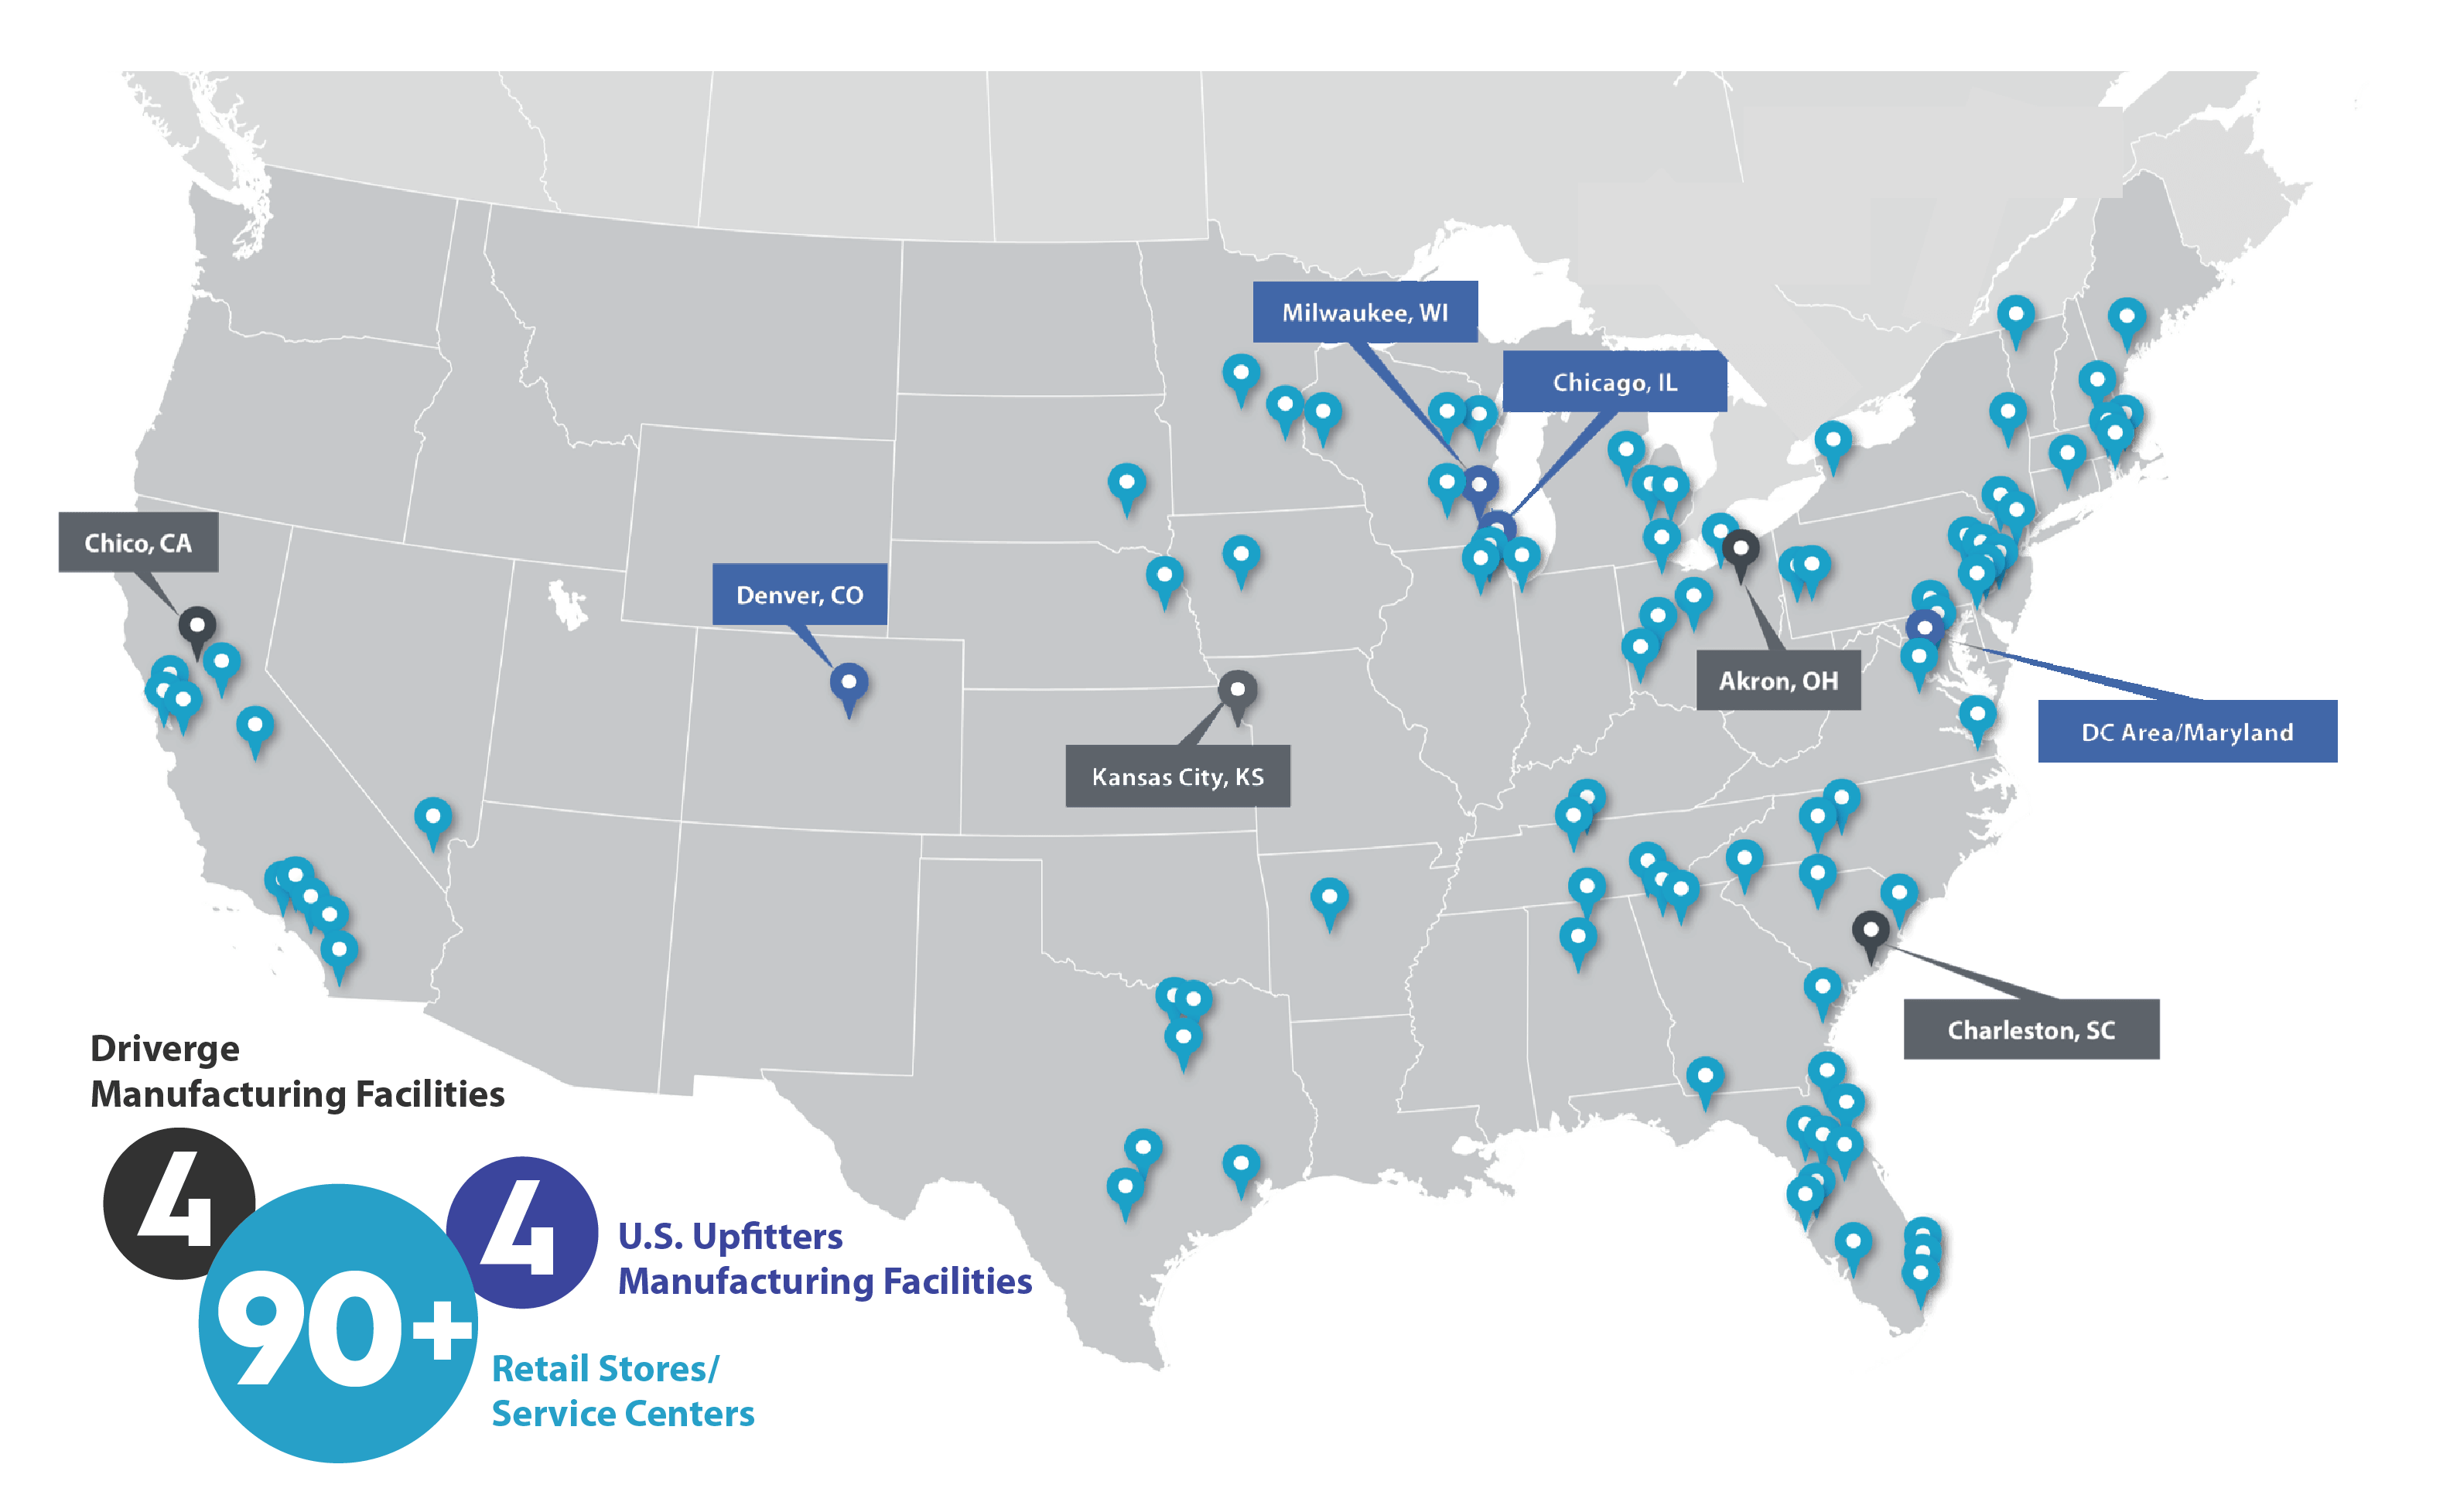 Map of Driverge Manufacturing Facilities, US Upfitters manufacturing facilities and retail stores / service centers.